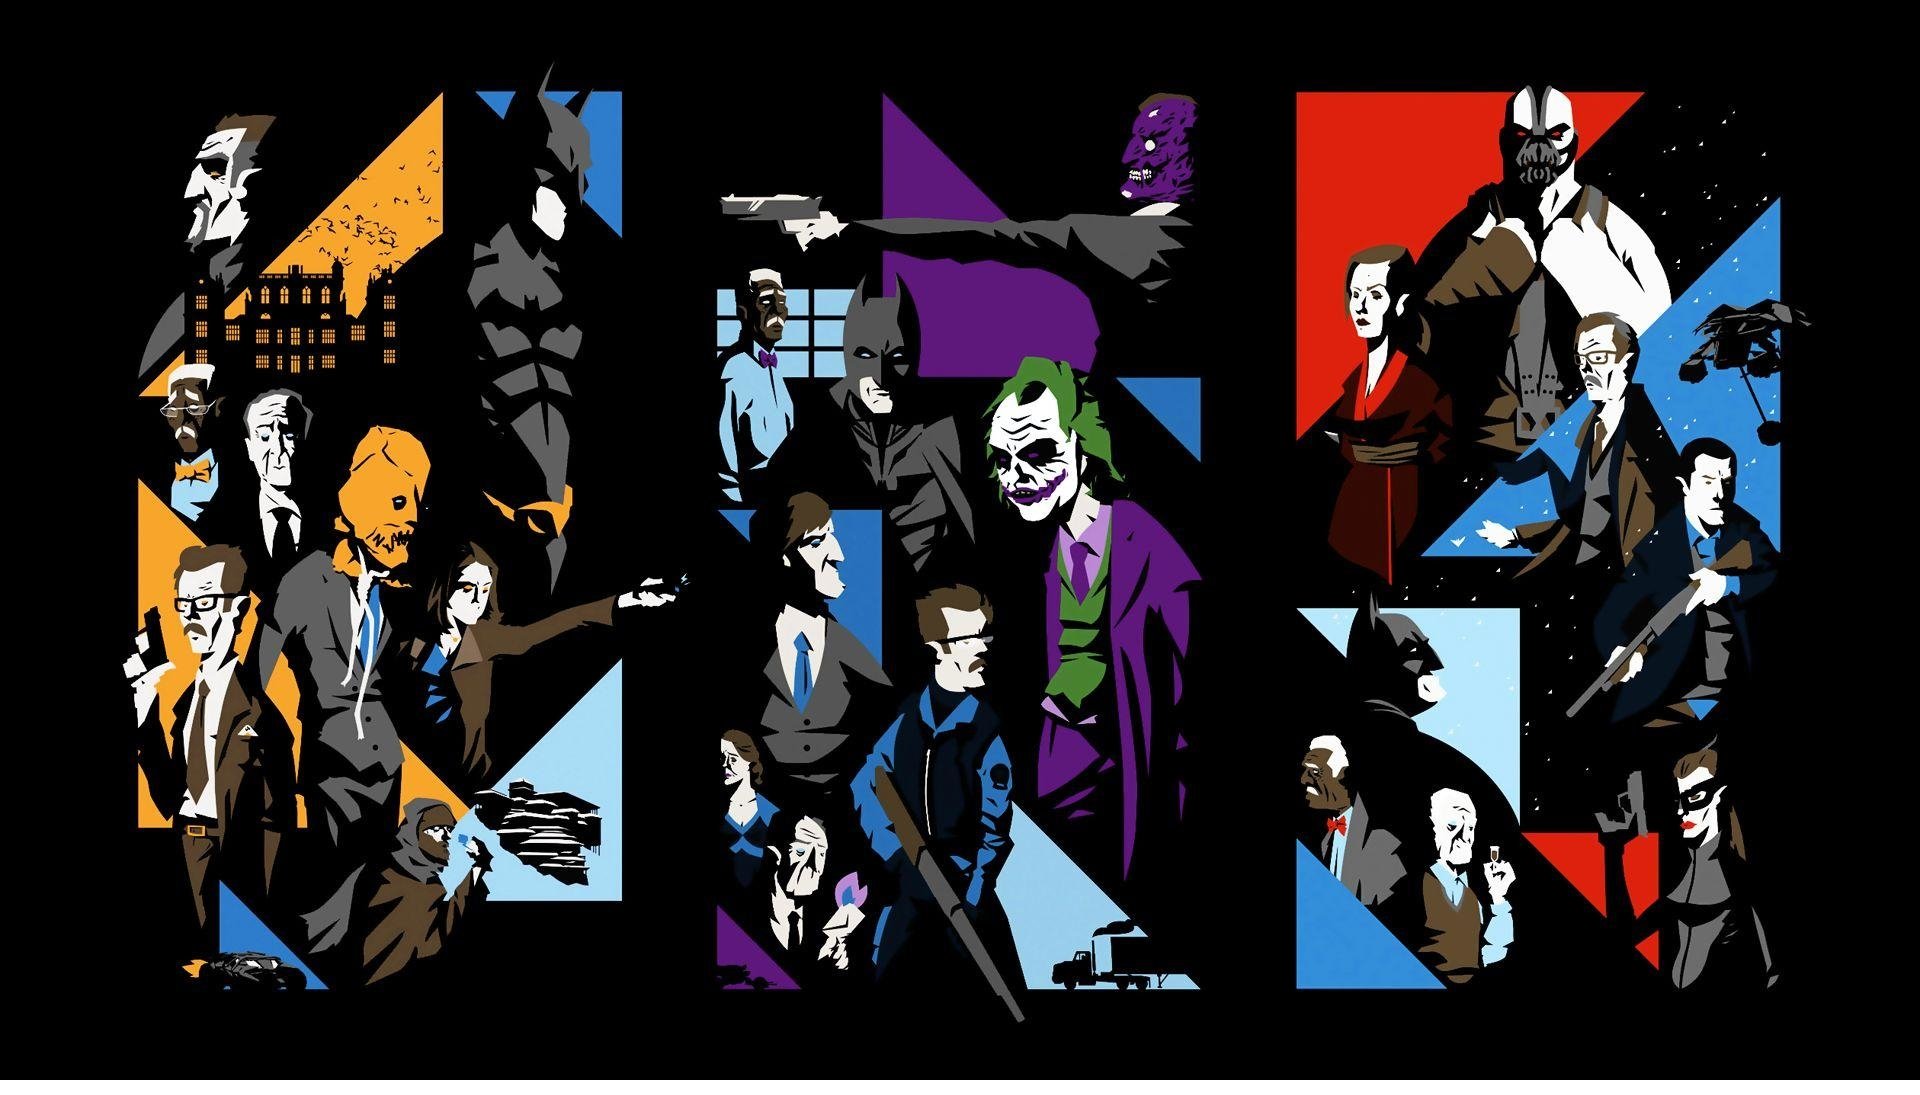 The Dark Knight Trilogy Wallpapers